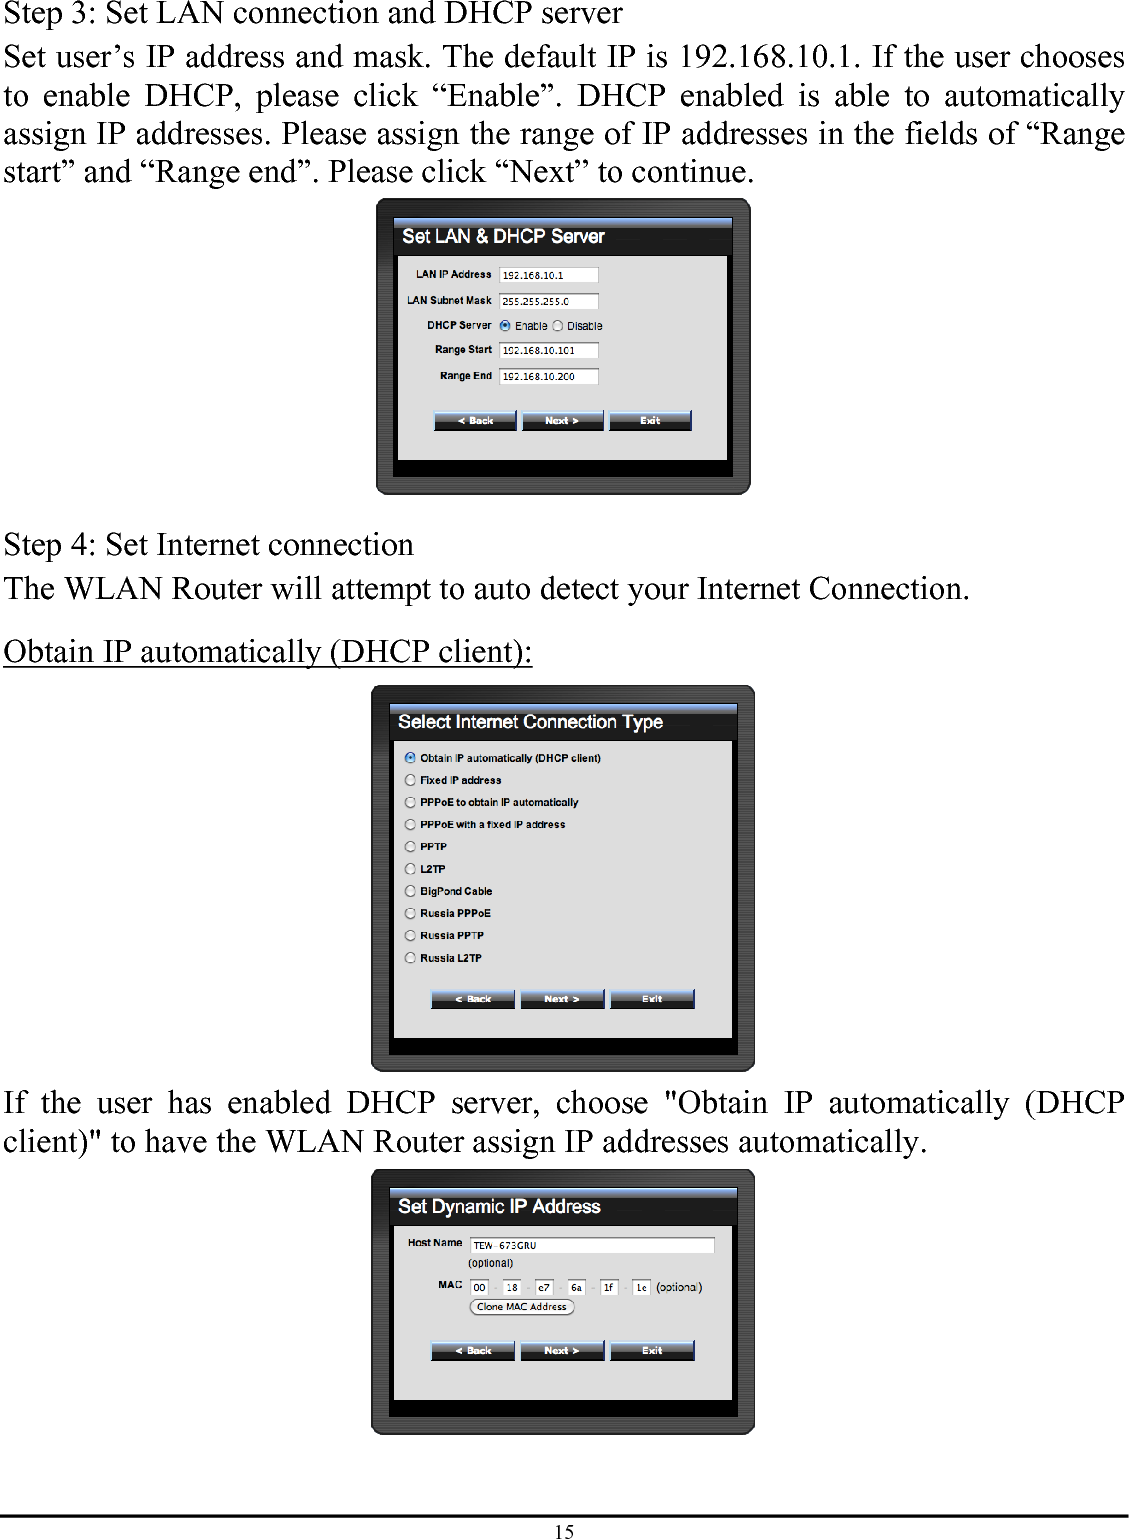 15 Step 3: Set LAN connection and DHCP server Set user’s IP address and mask. The default IP is 192.168.10.1. If the user chooses to enable DHCP, please click “Enable”. DHCP enabled is able to automatically assign IP addresses. Please assign the range of IP addresses in the fields of “Range start” and “Range end”. Please click “Next” to continue.  Step 4: Set Internet connection The WLAN Router will attempt to auto detect your Internet Connection. Obtain IP automatically (DHCP client):  If the user has enabled DHCP server, choose &quot;Obtain IP automatically (DHCP client)&quot; to have the WLAN Router assign IP addresses automatically.  